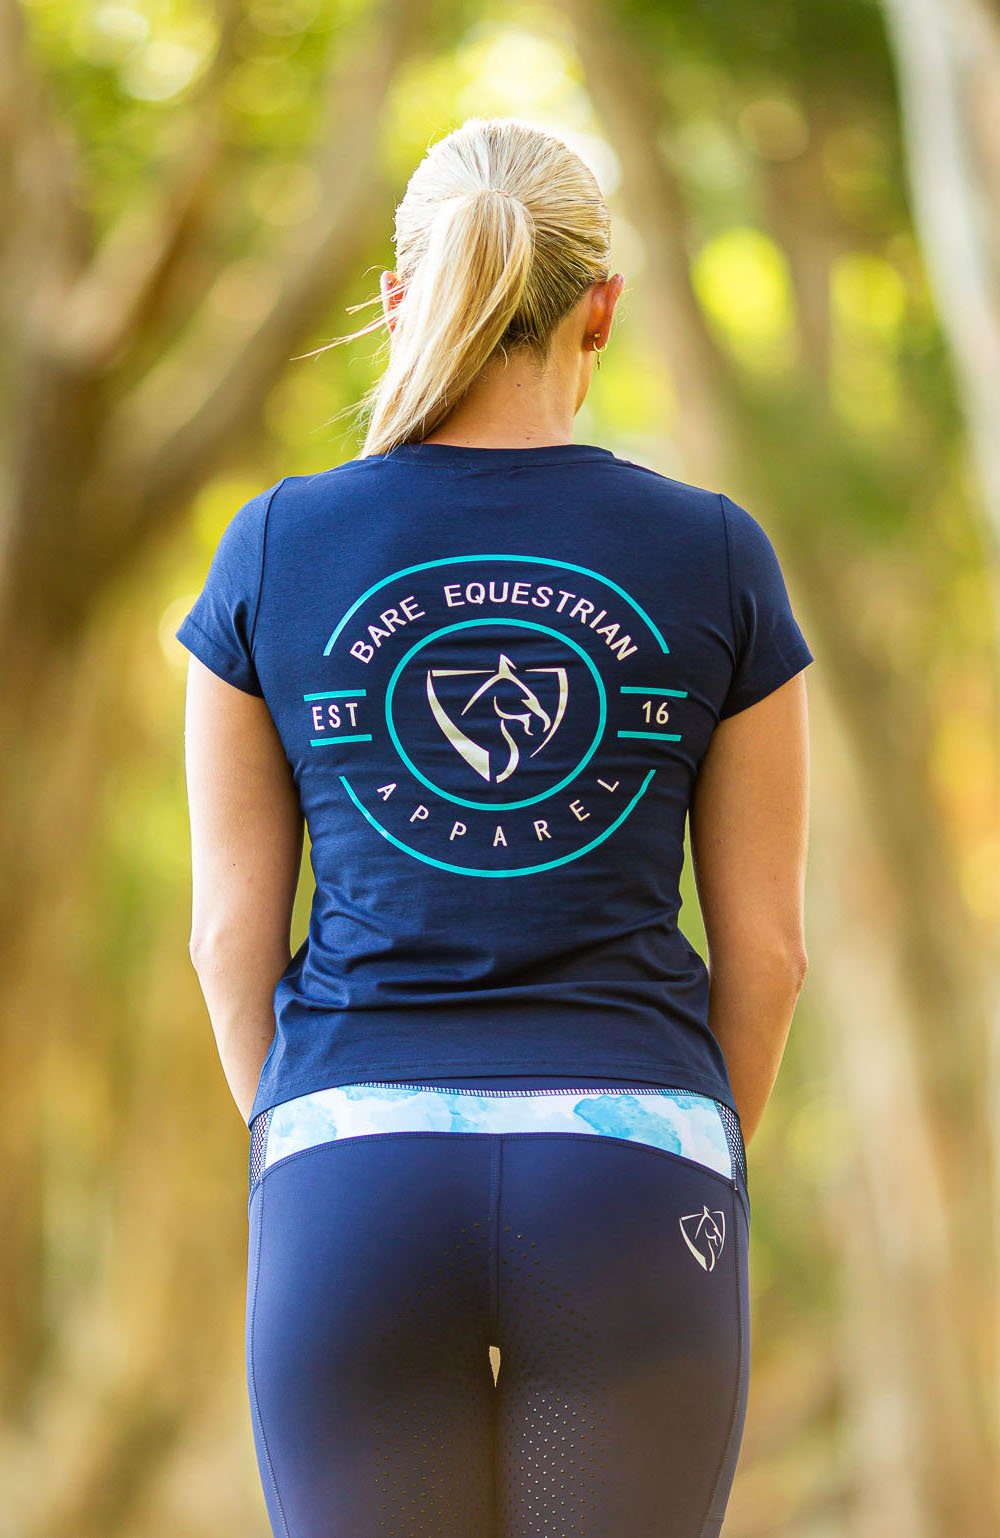 BARE Emblem T-Shirt - Navy, Teal and Silver